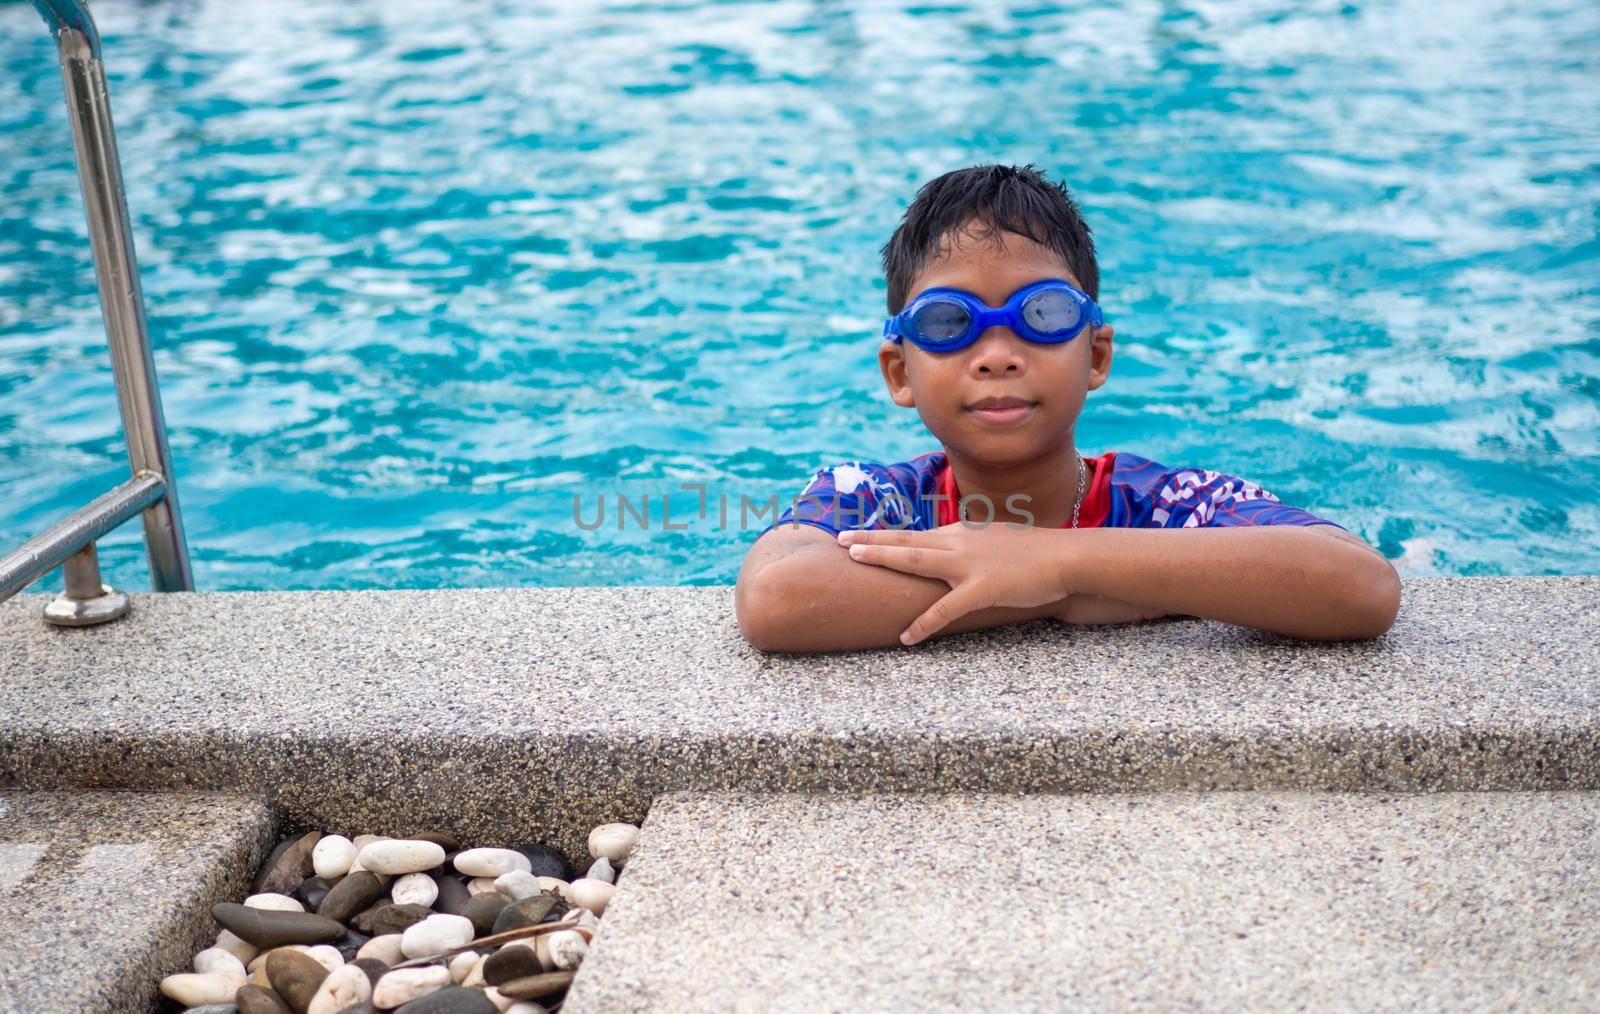 The boy wearing swimsuits and glasses Smile while perched on the edge of the swimming pool. by Unimages2527